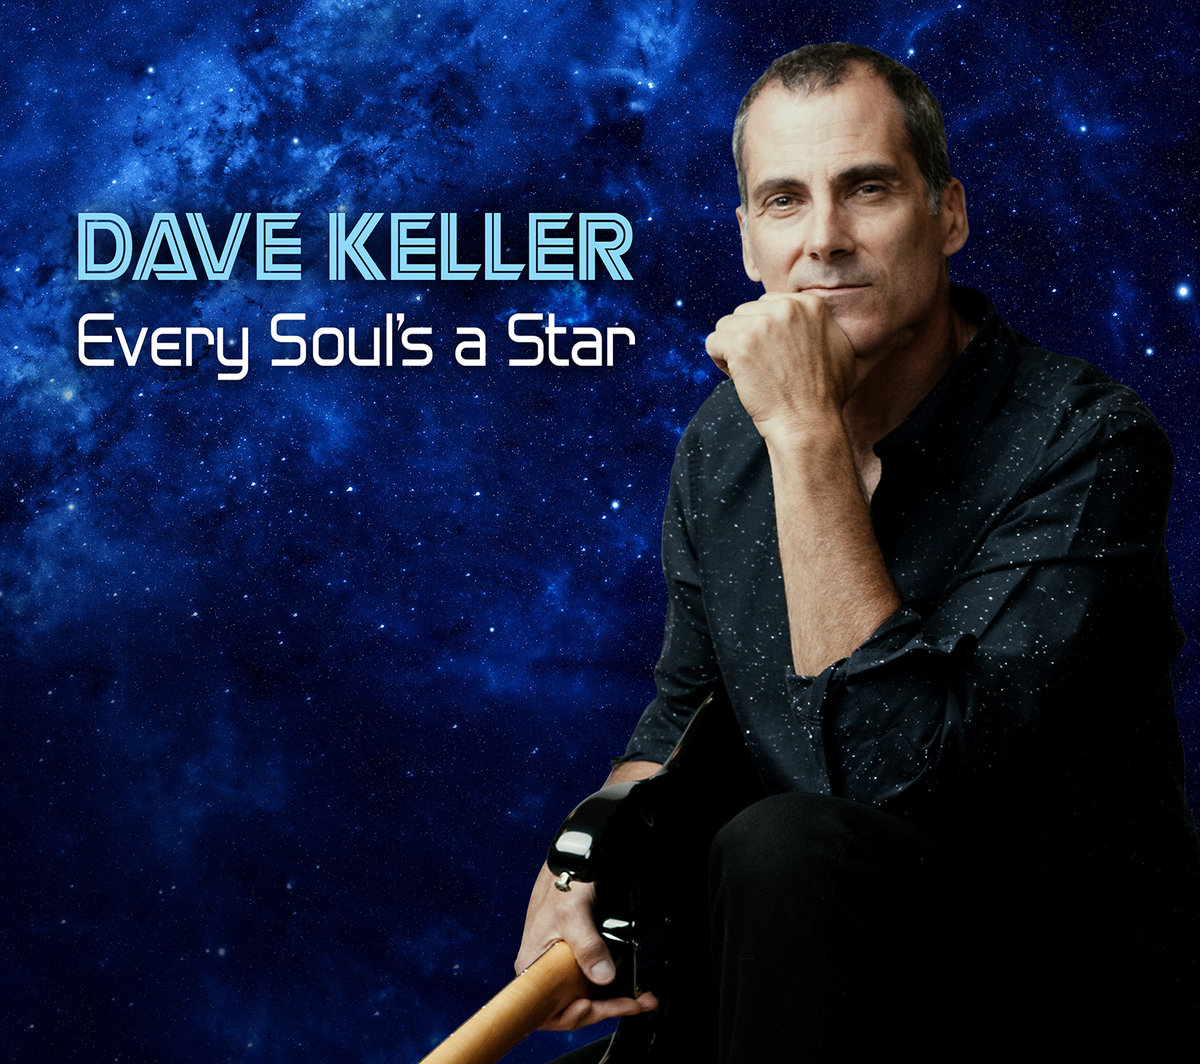 DK every souls a star